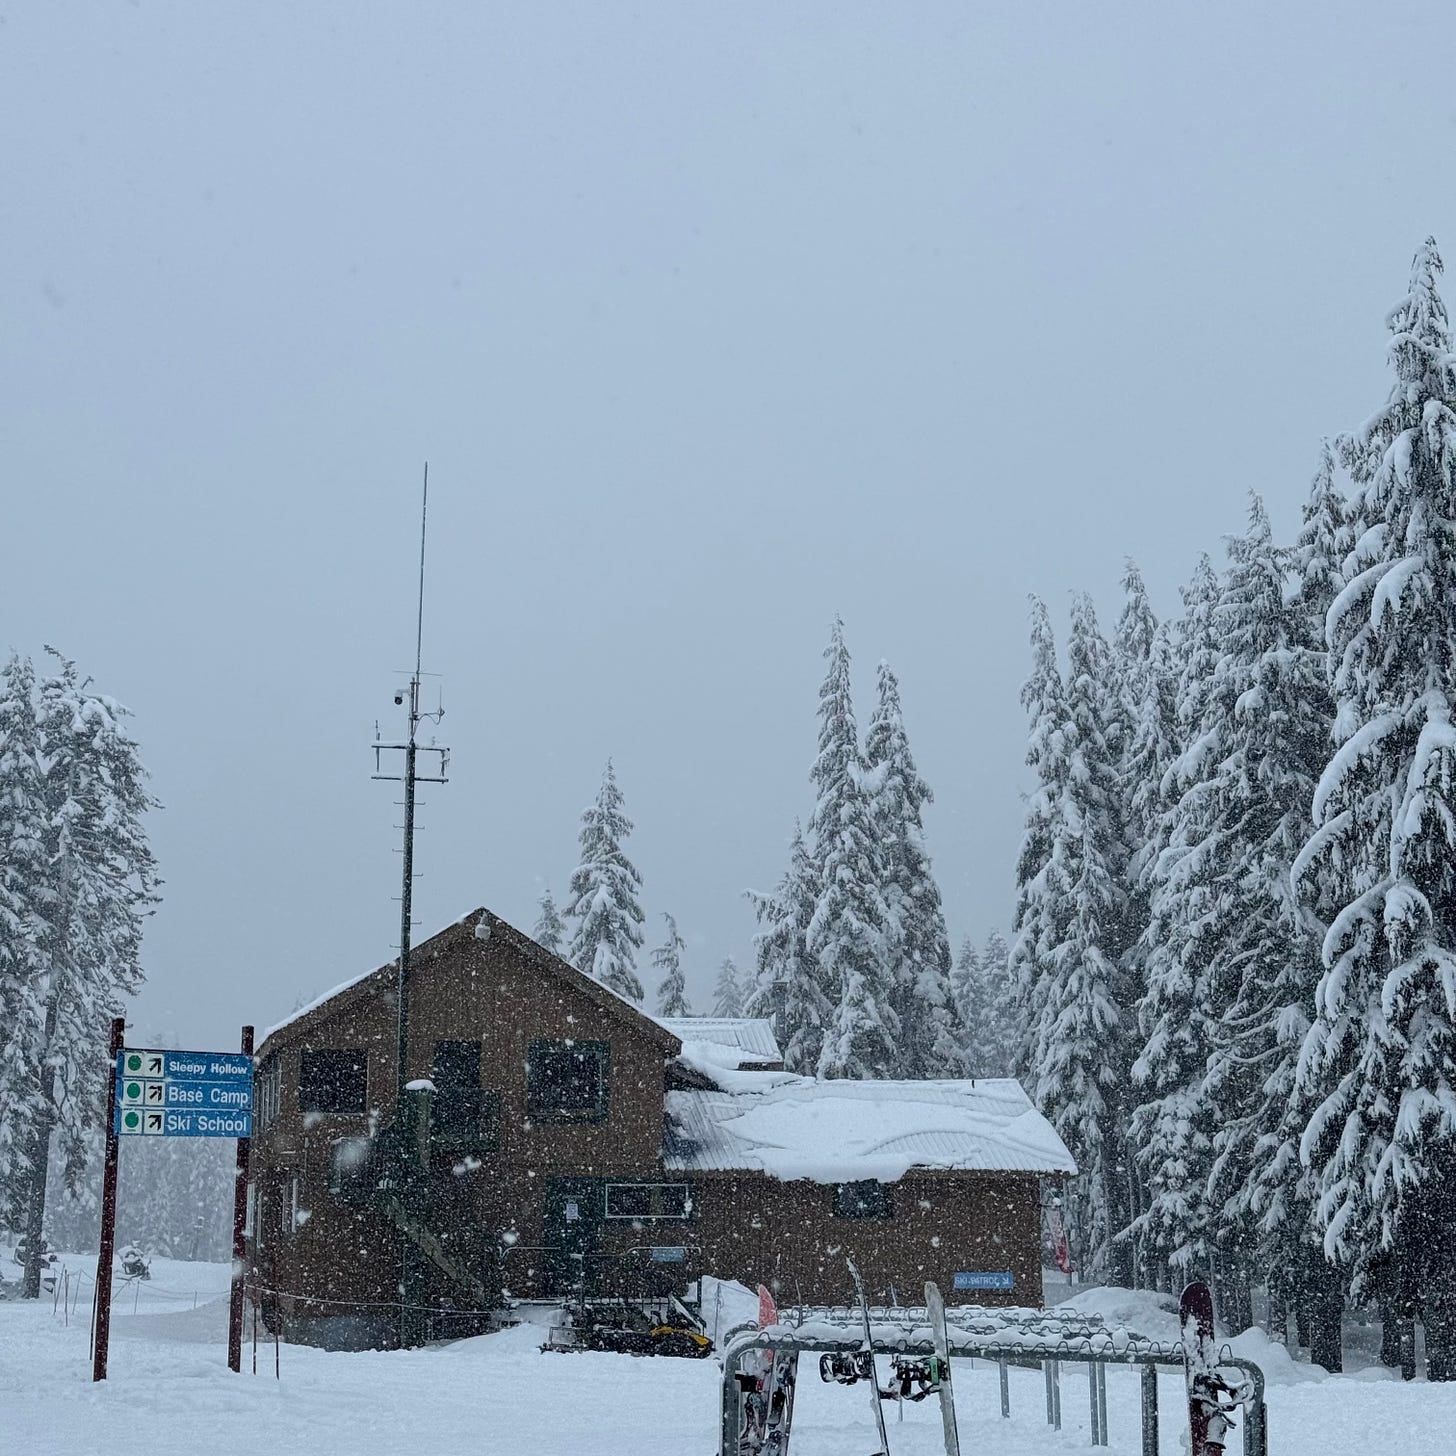 A brown building at a ski area covered in snow during a snow storm.